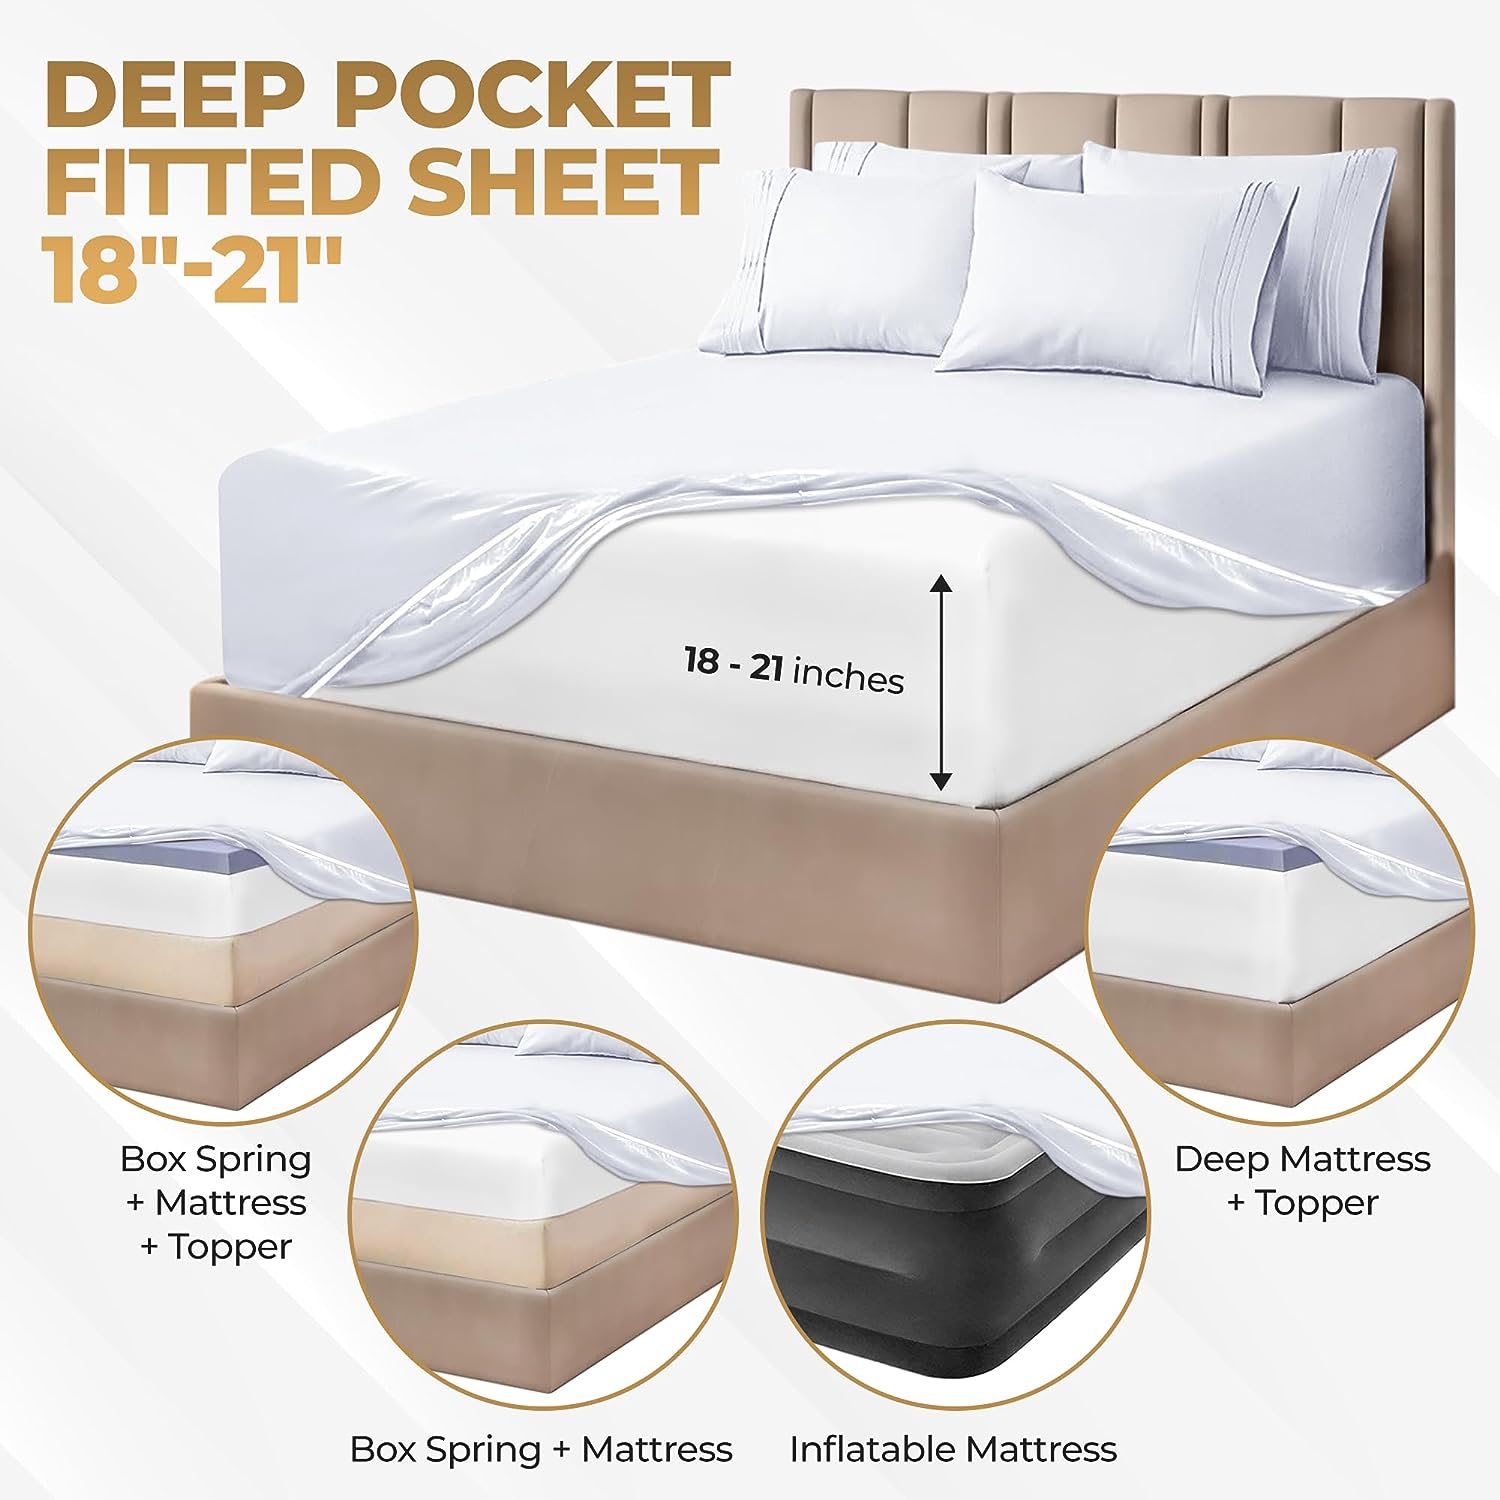 Superior Egyptian Cotton 1000 Thread Count Extra Deep Pocket Solid Sheet Set - White